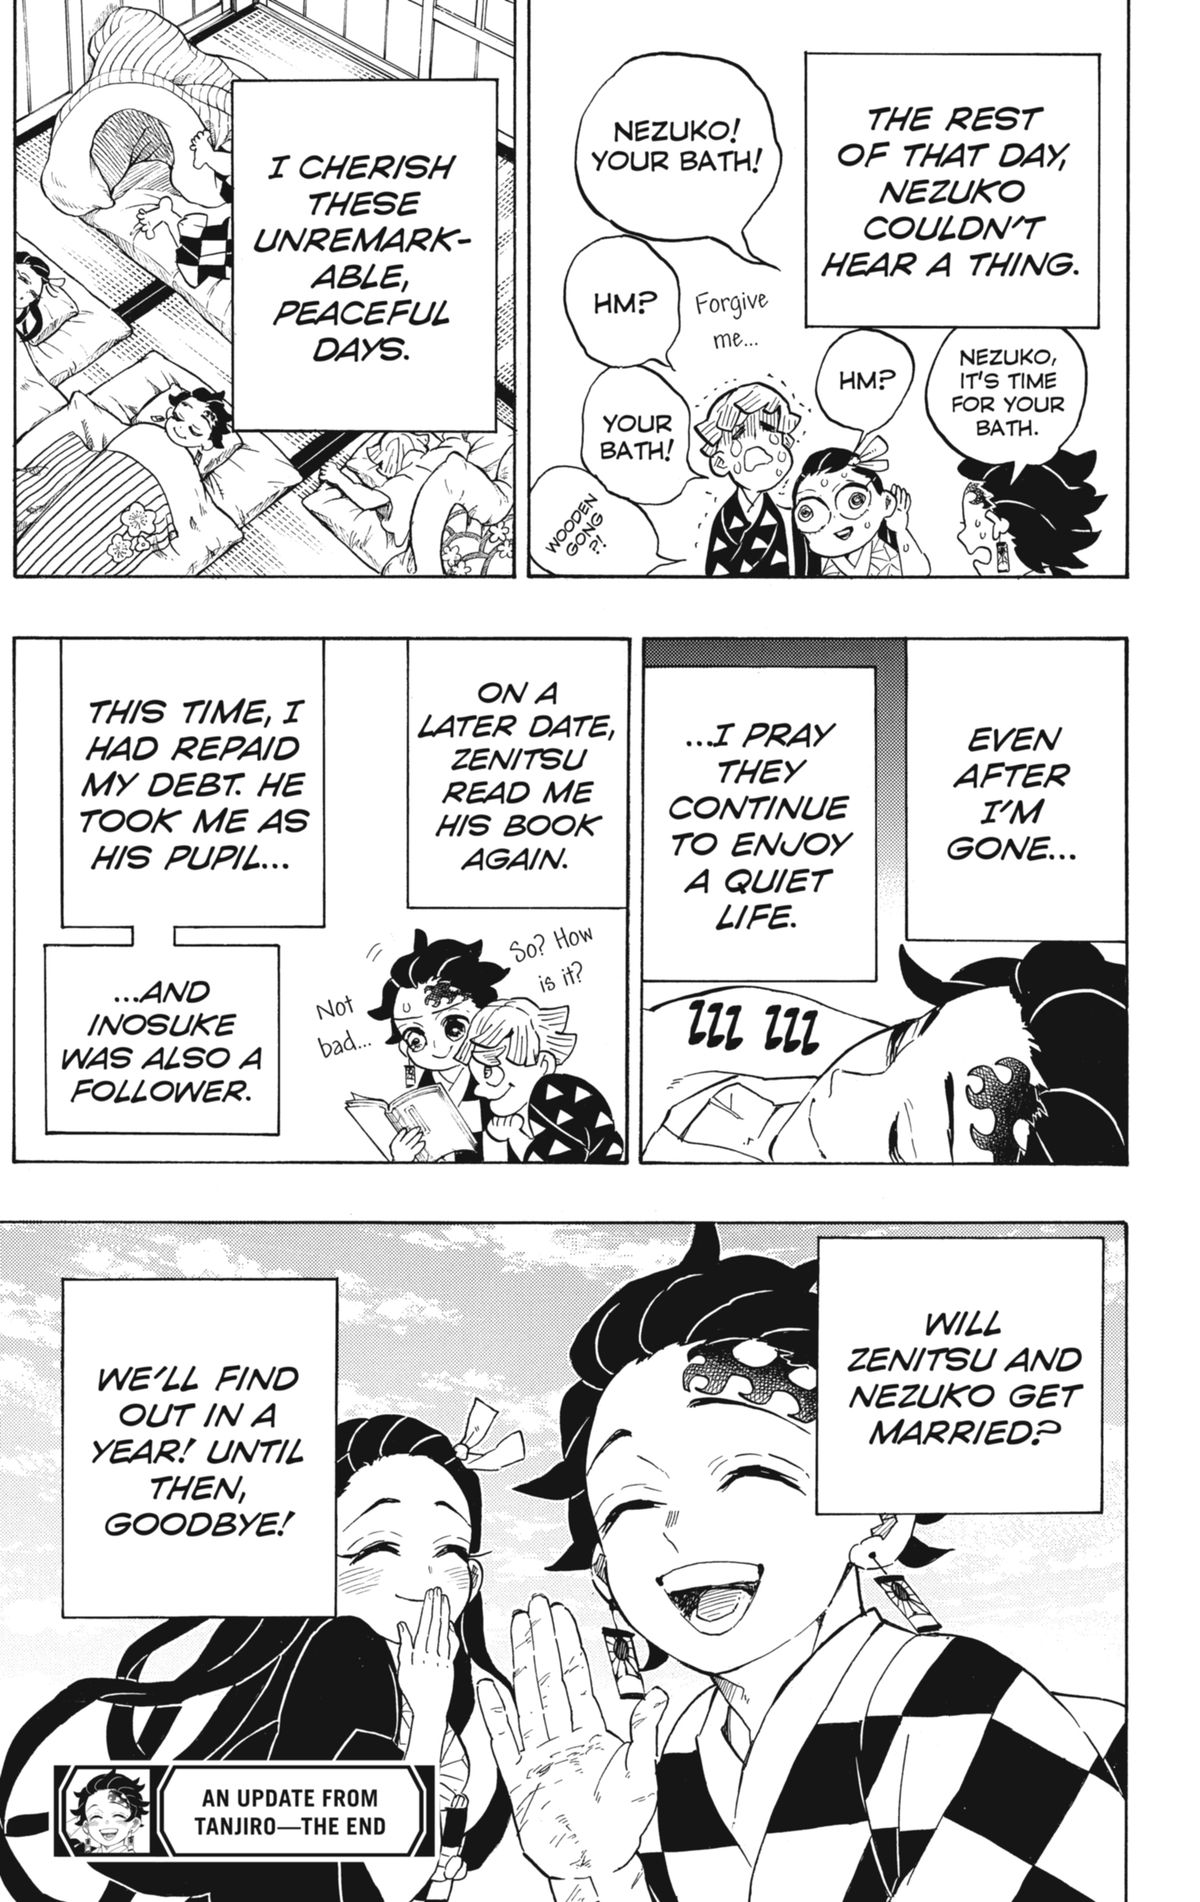 The top two panels say: “The rest of that day, Nezuko couldn’t hear a thing. I cherish these unremarkable, peaceful days. Even after I’m gone I pray they continue to enjoy a quiet life. On a later date, Zenitsu read me his book again. This time I had repaid my debt. He took me as his pupil and Inosuke was also a follower.” The bottom panel shows Tanjiro and Nezuko smiling with the text: “Will Zenitsu and Nezuko get married? We’ll find out in a year! Until then, goodbye!”